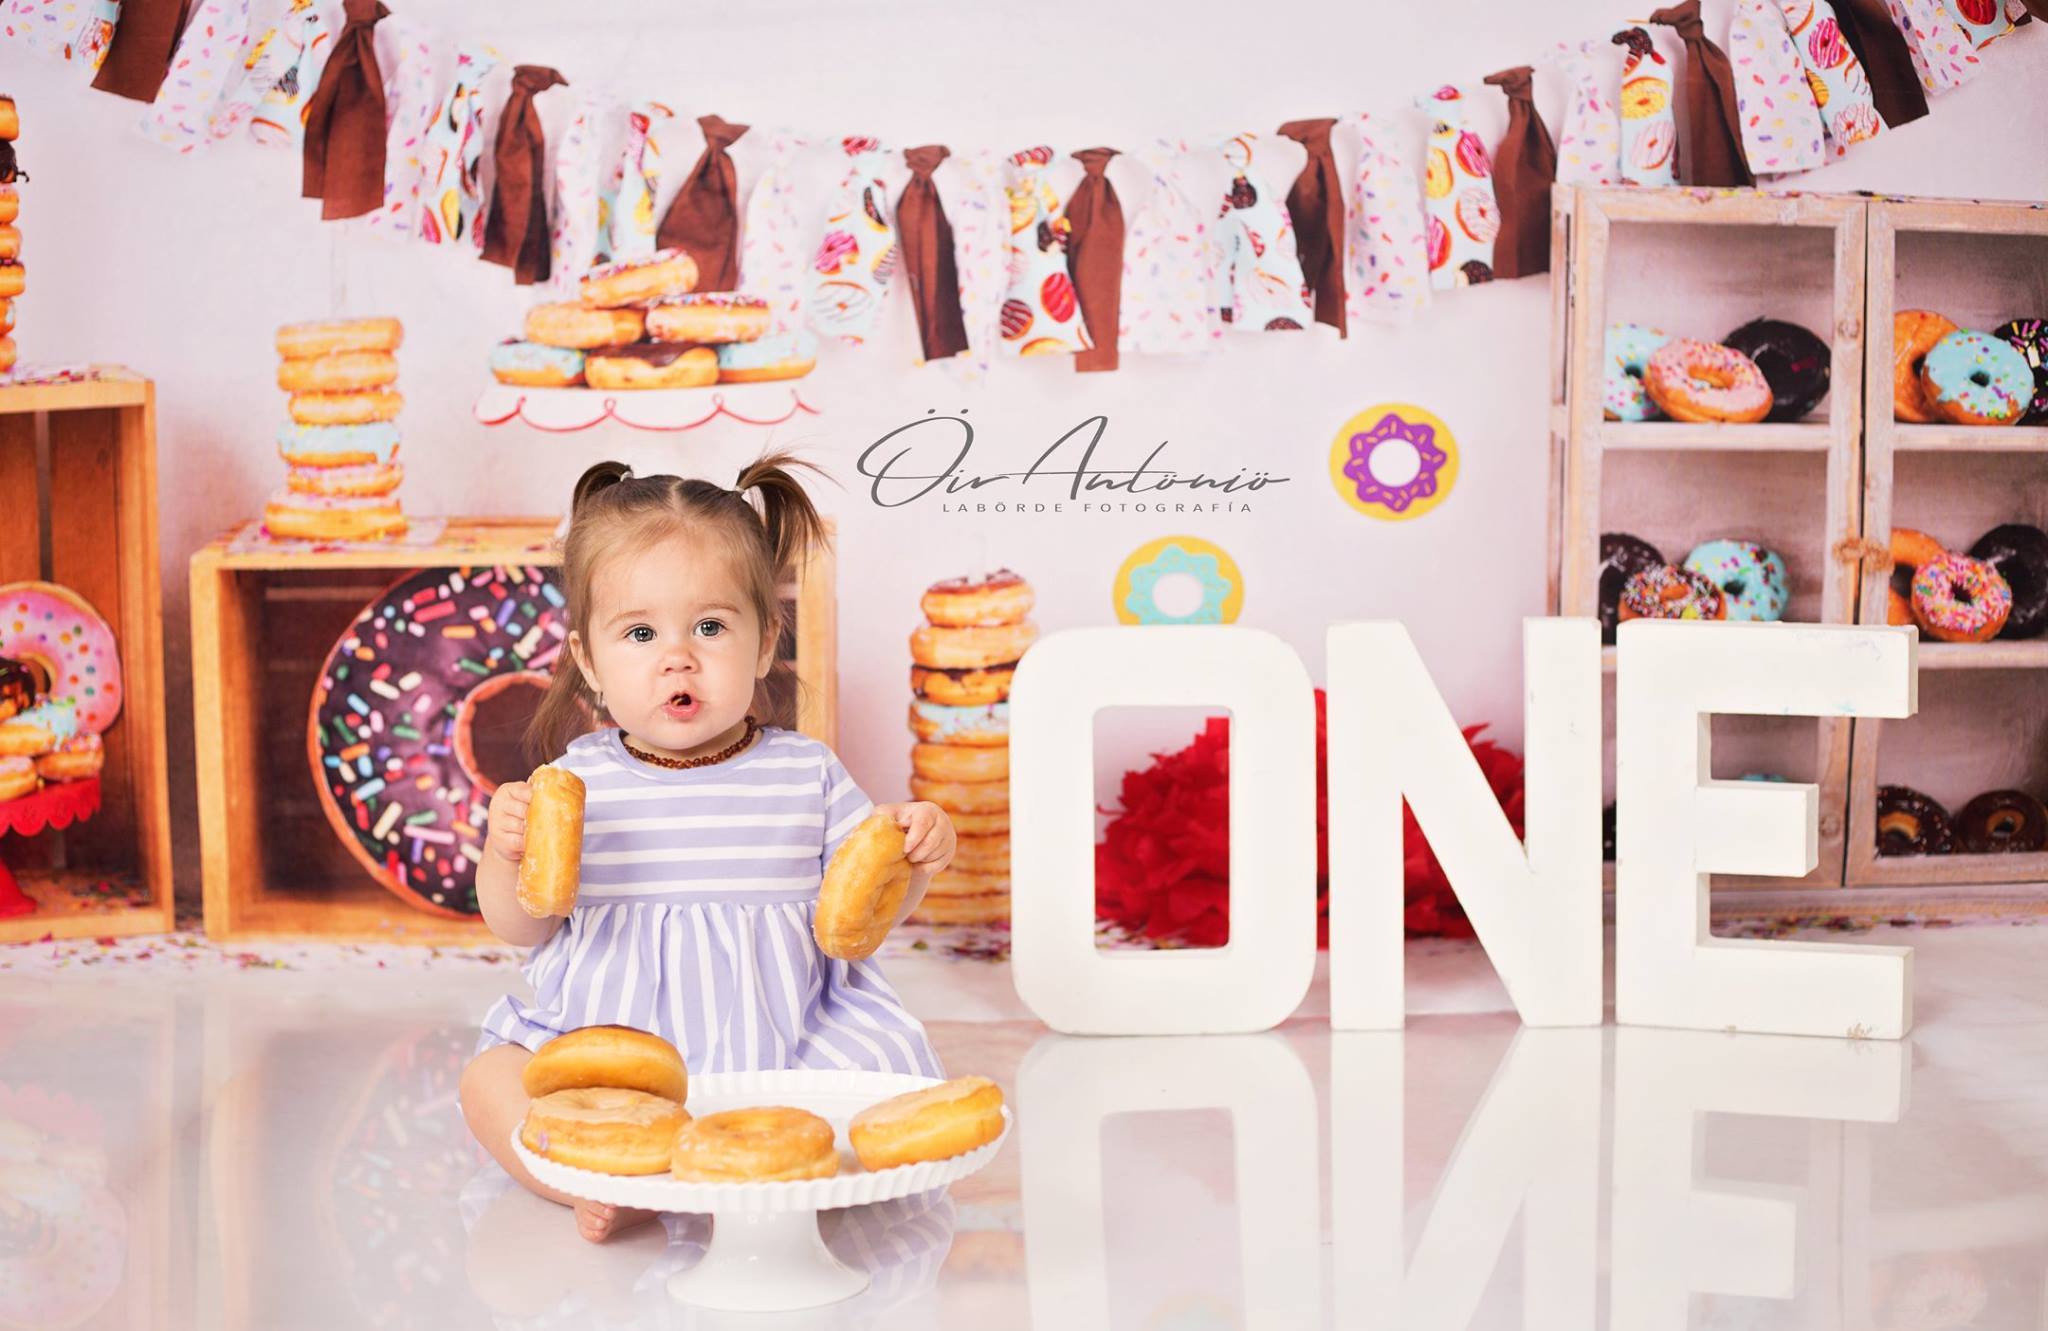 Kate Chocolate Donut Banners Children Backdrop